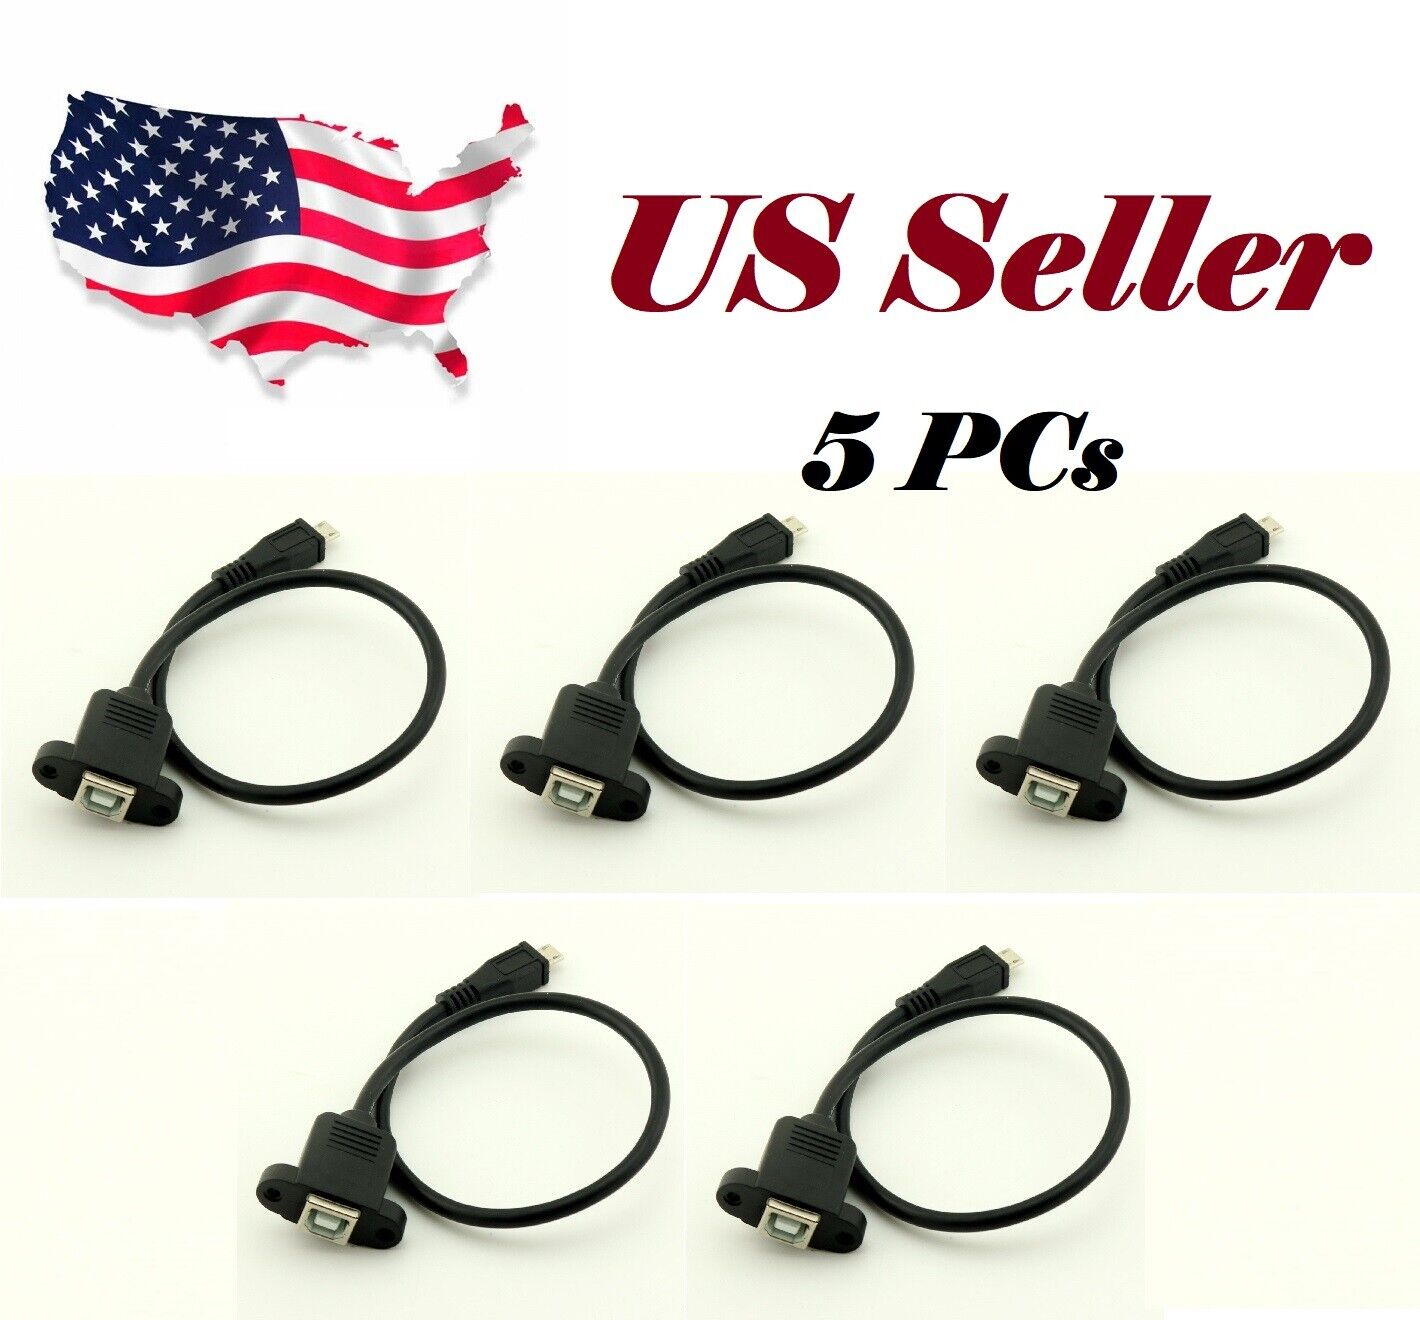 5x USB 2.0 B Female Socket Printer Panel Mount To Micro USB 5 Pin Male Cable 1FT